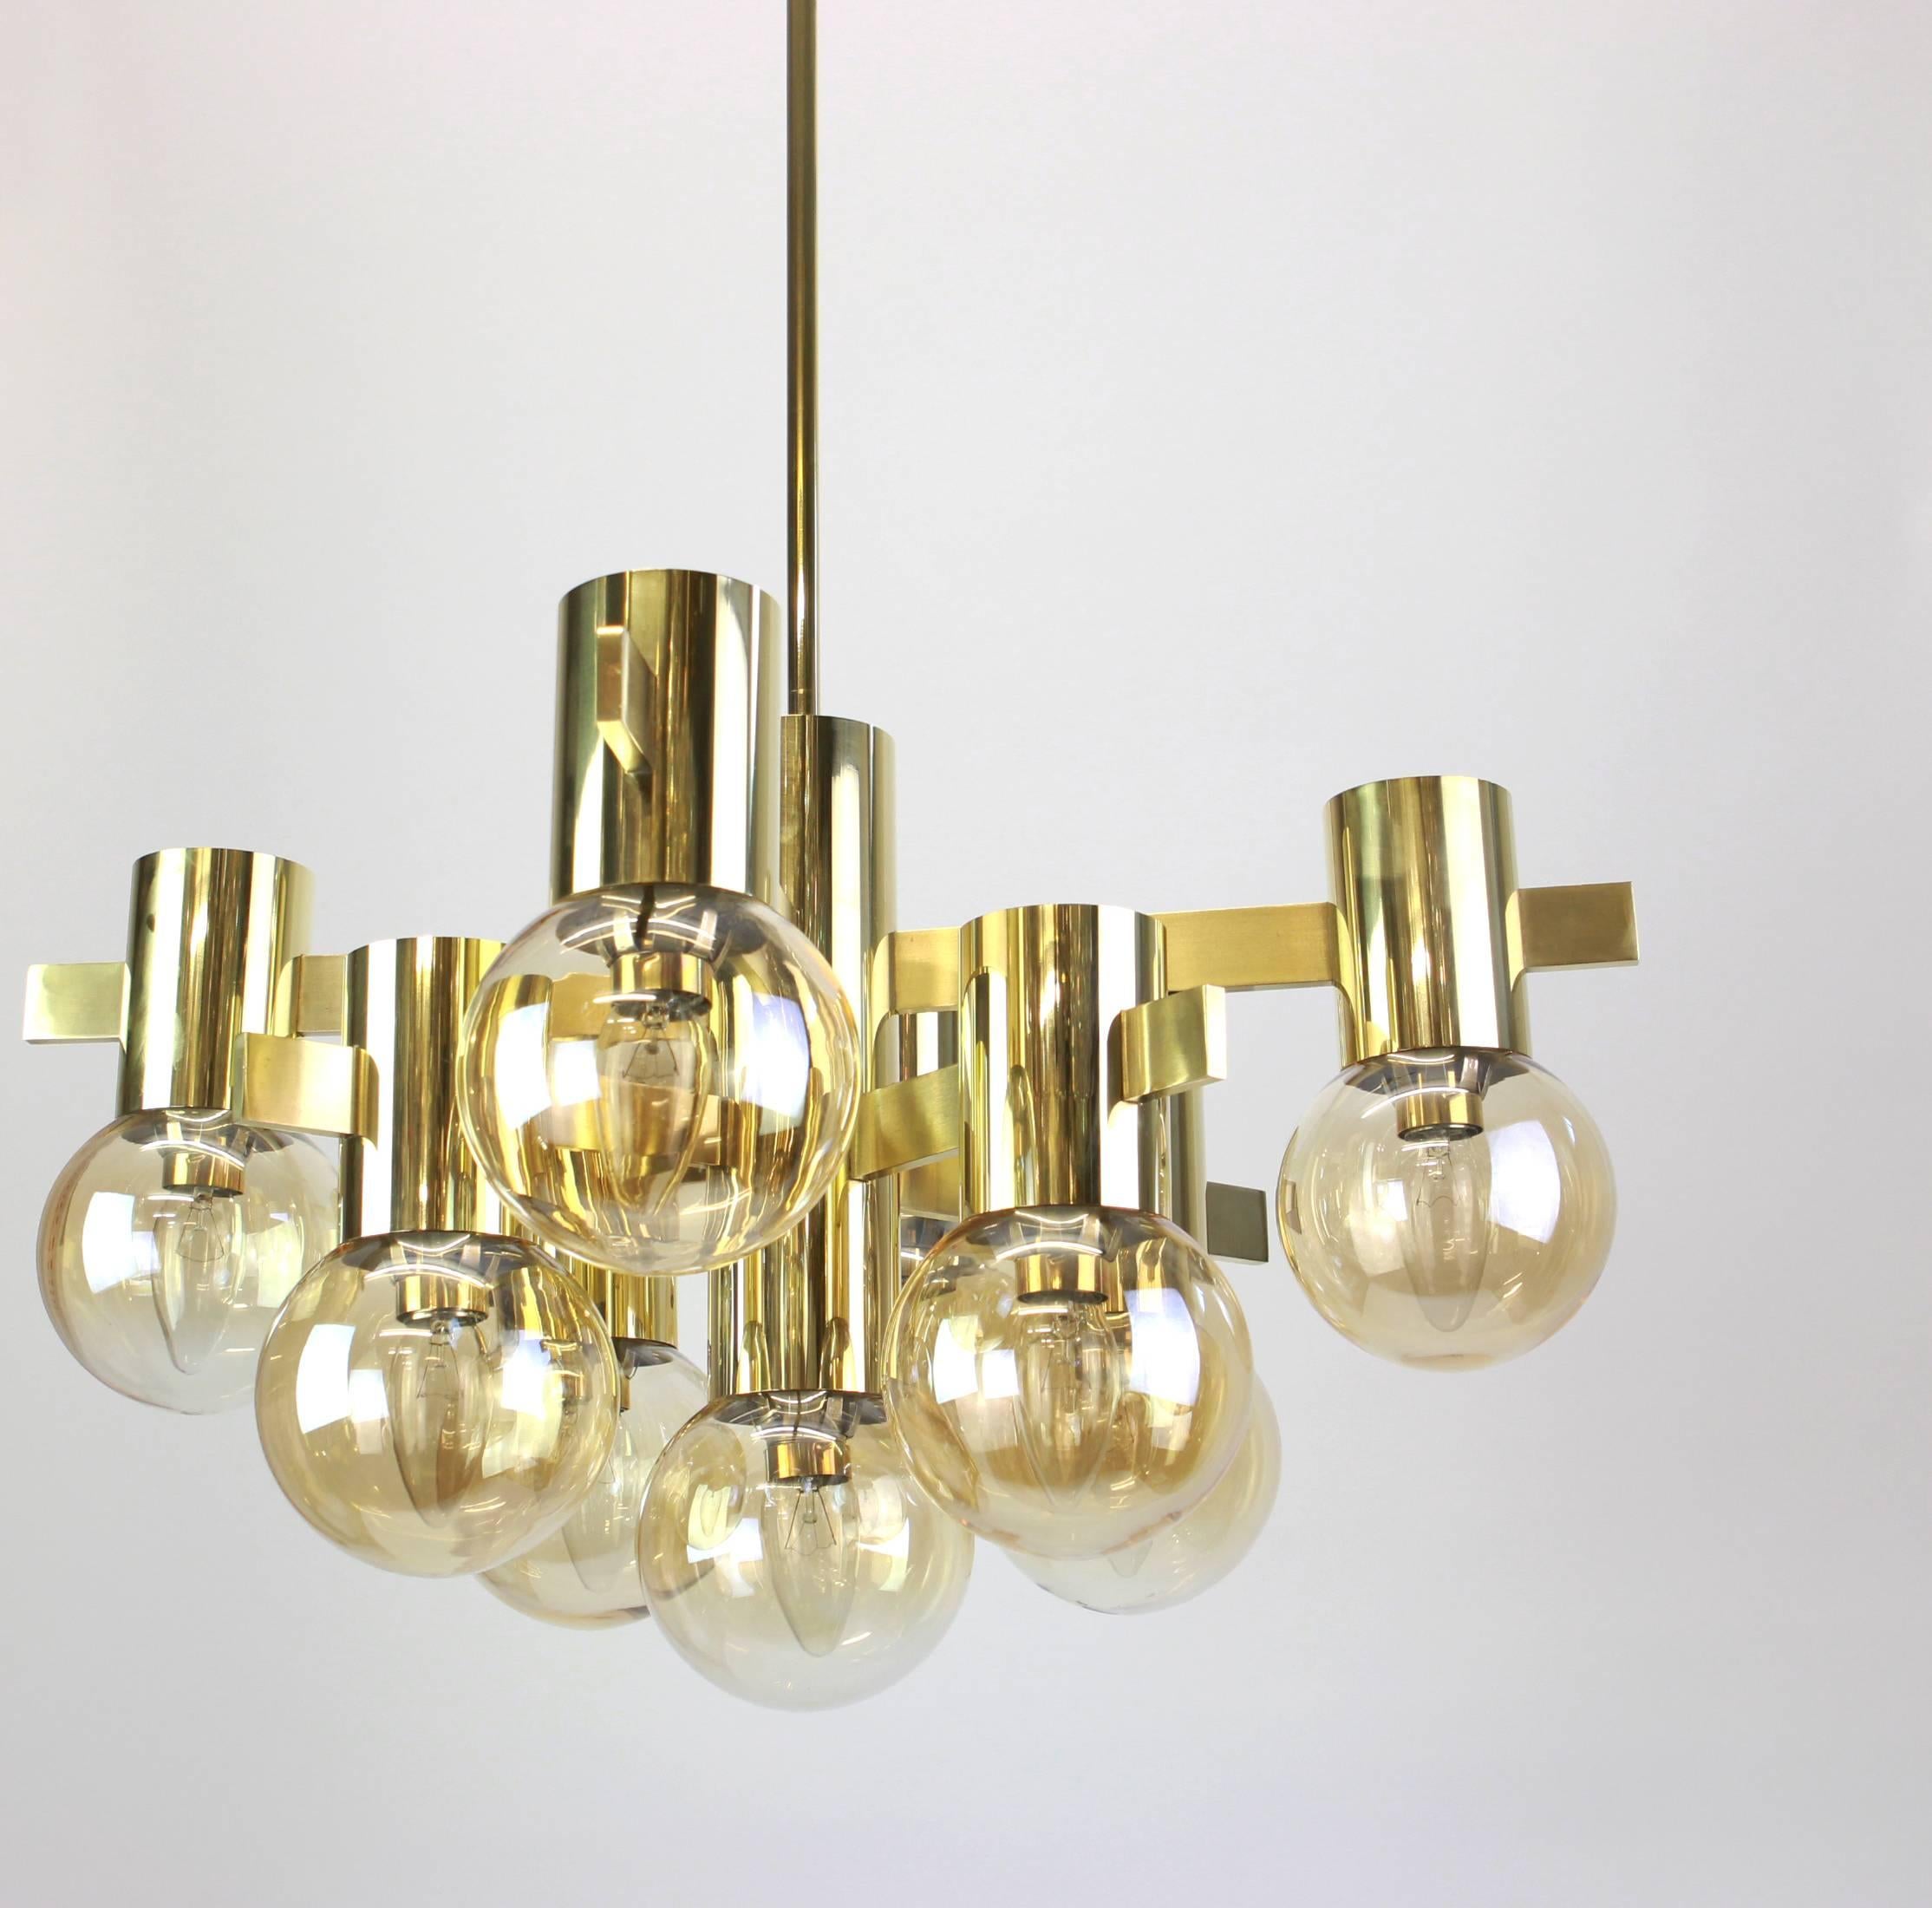 Nine-light brass chandelier in the style of Sciolari.
Smoked glass in a very beautiful Smokey brown color.
Made with brass, best of the 1960s.

High quality and in very good condition. Cleaned, well-wired and ready to use. 

The fixture